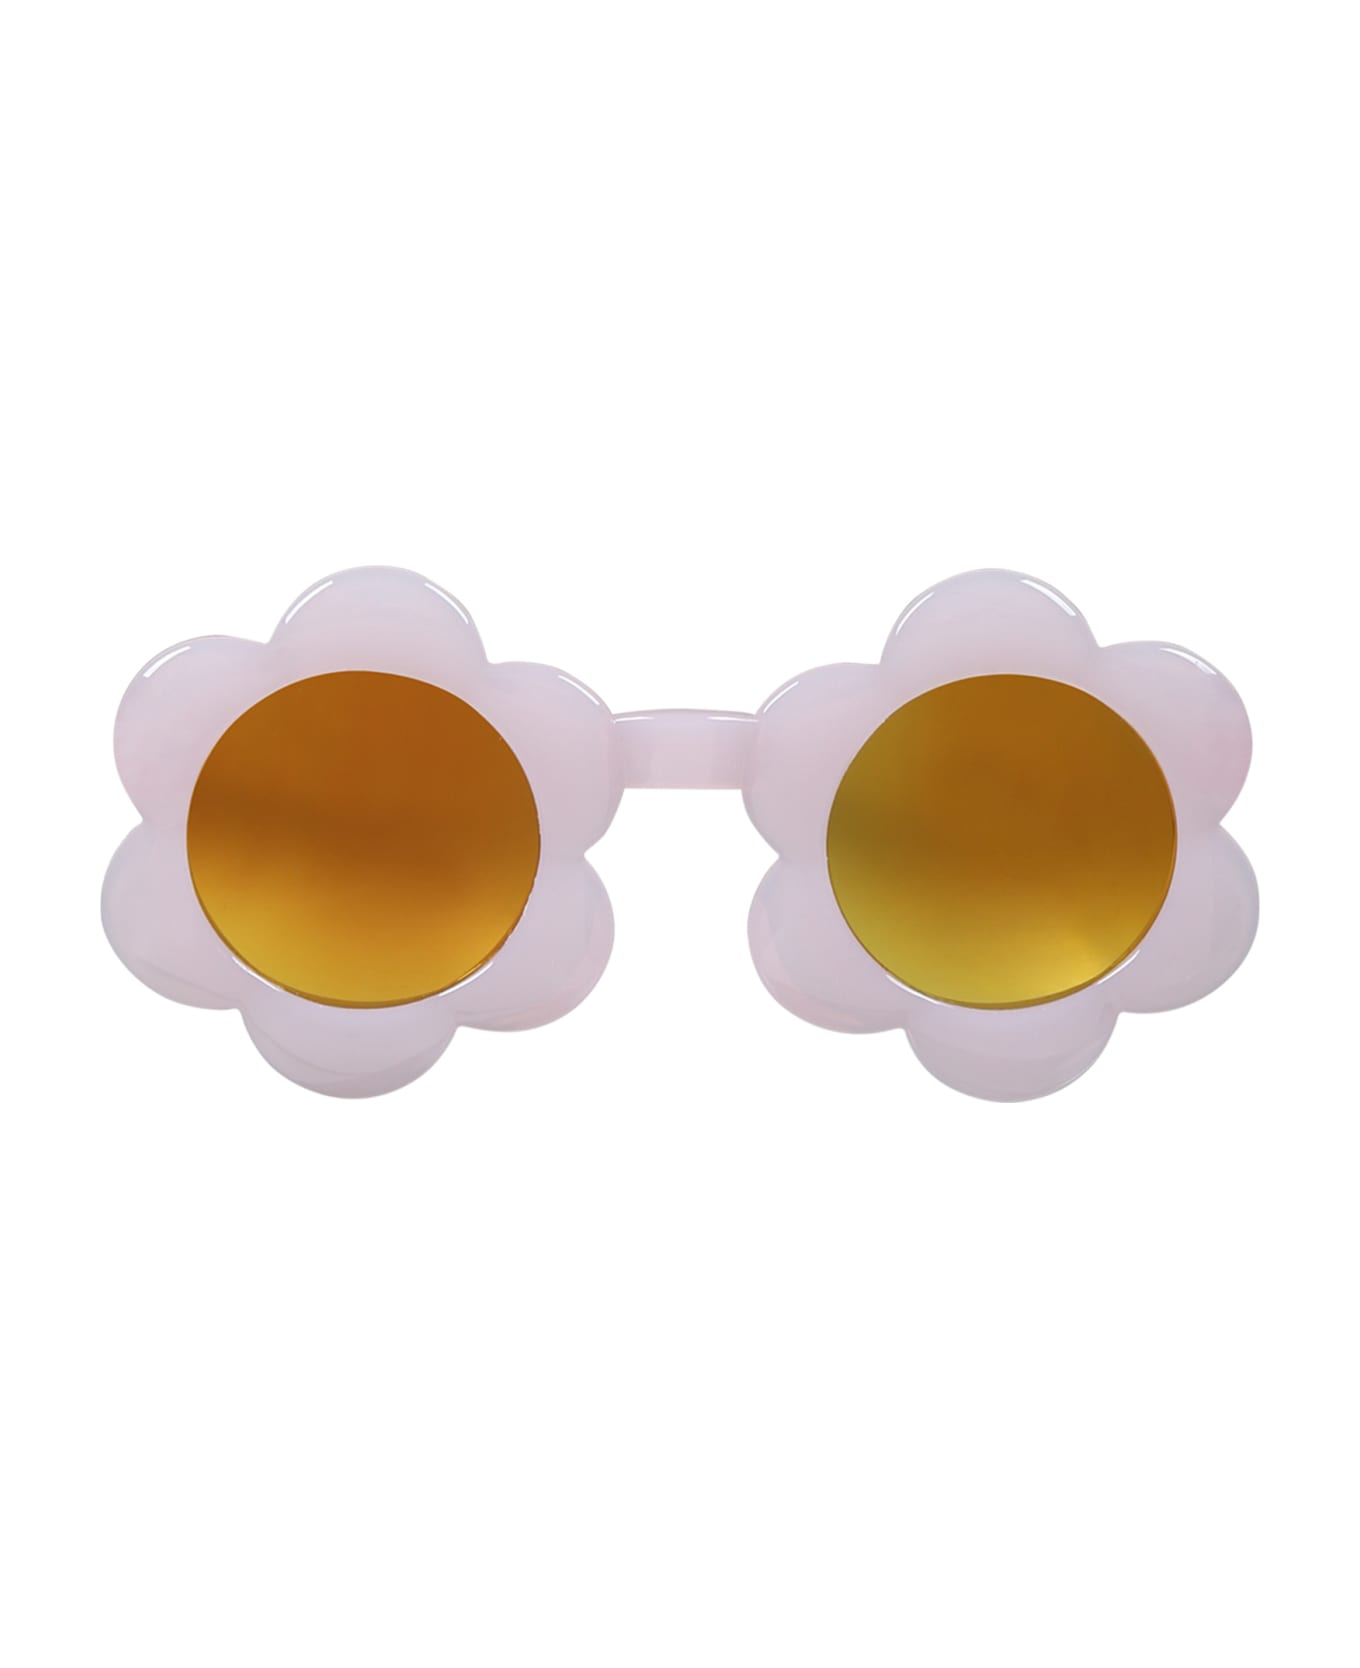 Molo Pink Soleil Sunglasses For Girl - Pink アクセサリー＆ギフト